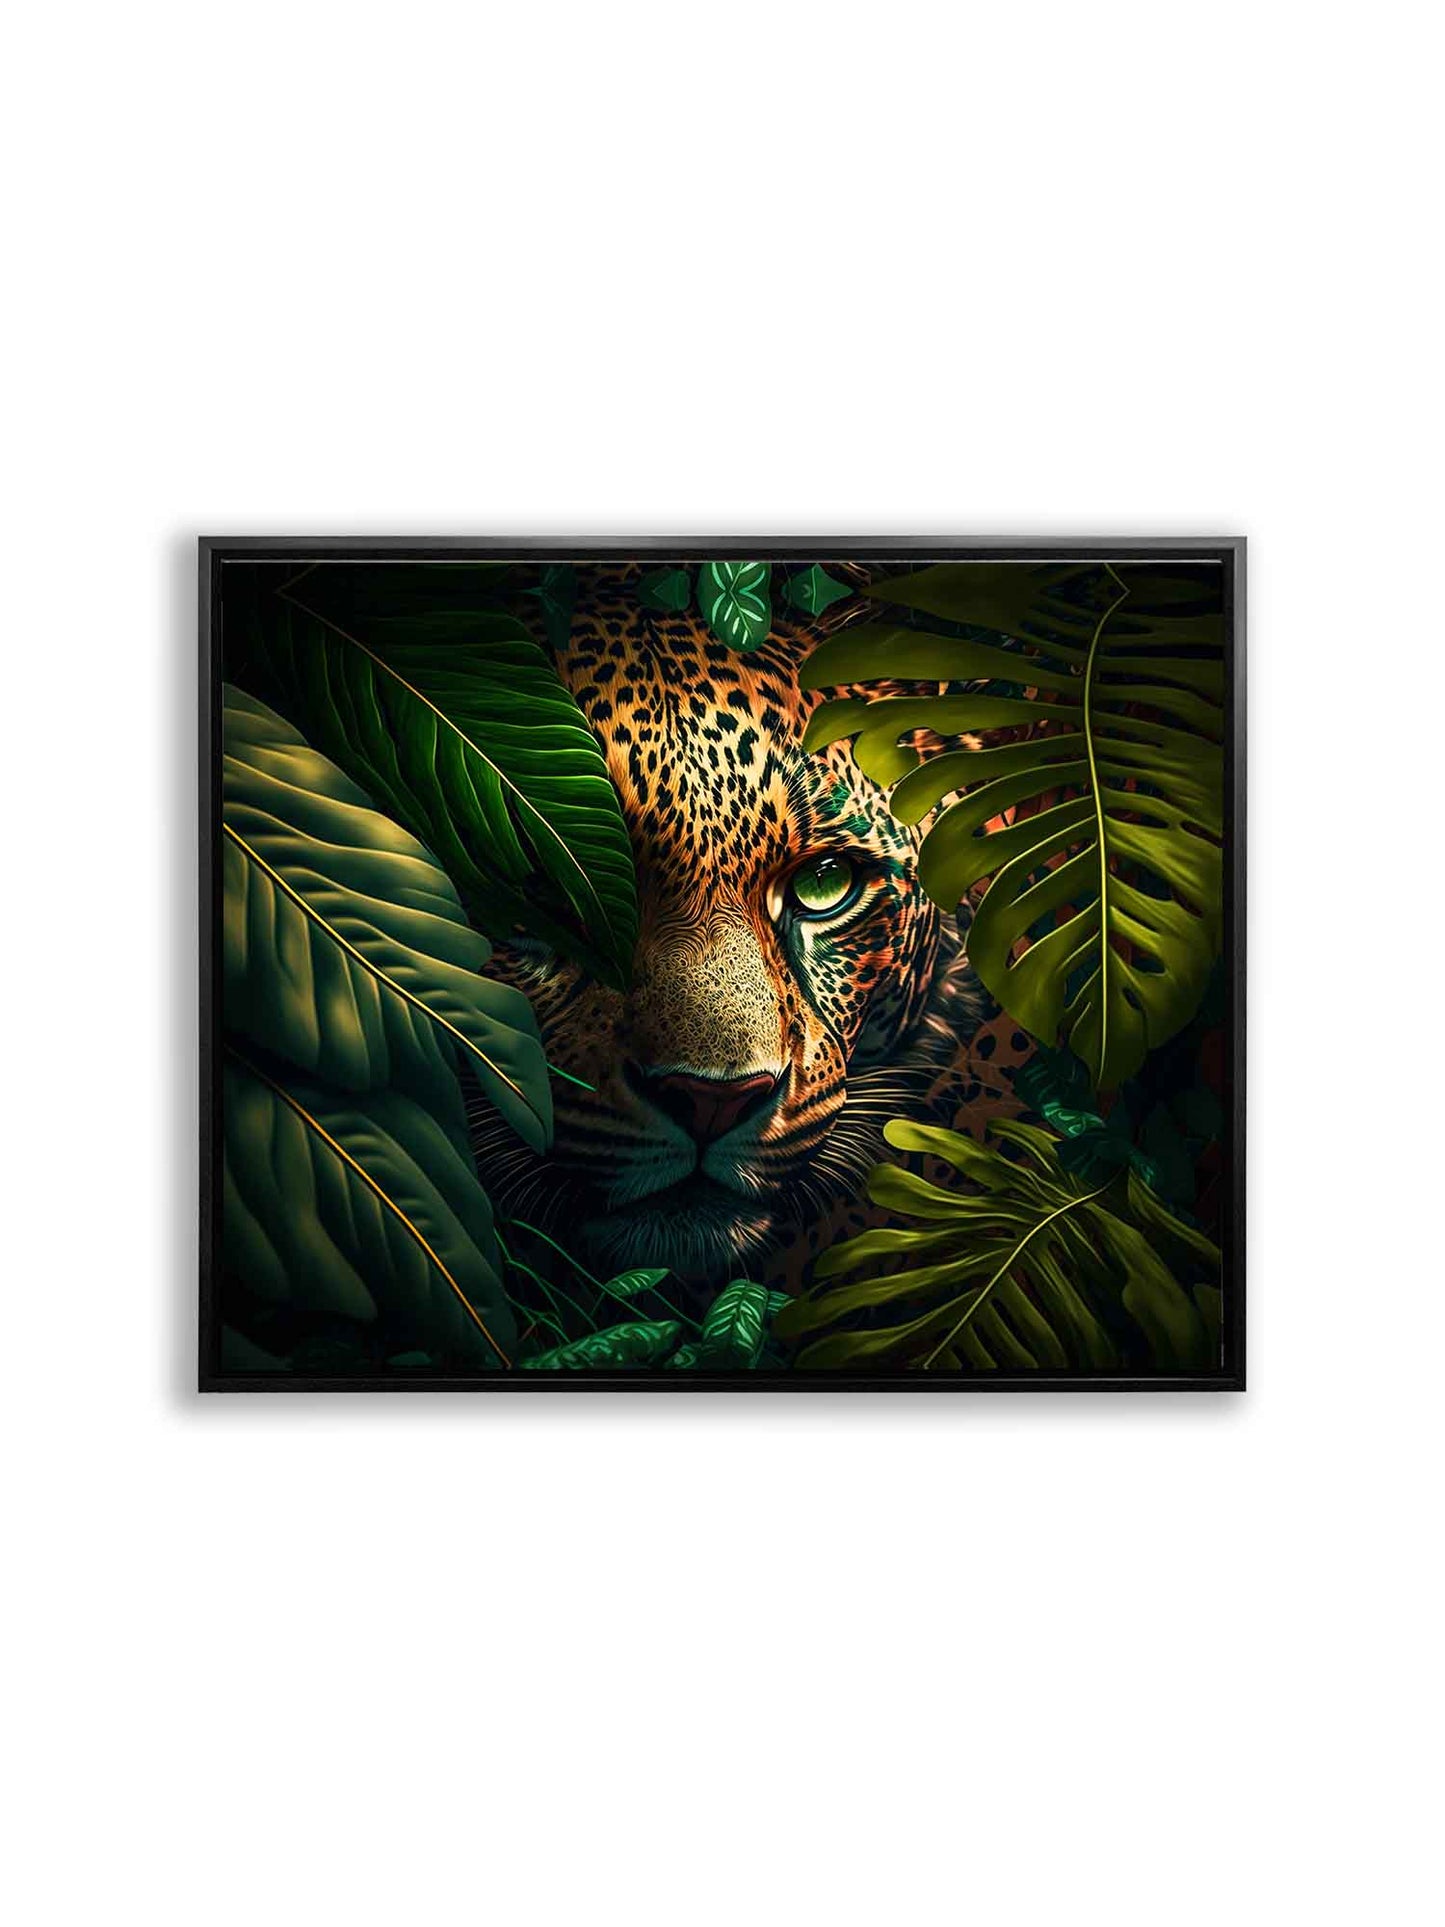 The leopard in the wildlife- Animal Canvas Art - Gold varnish.